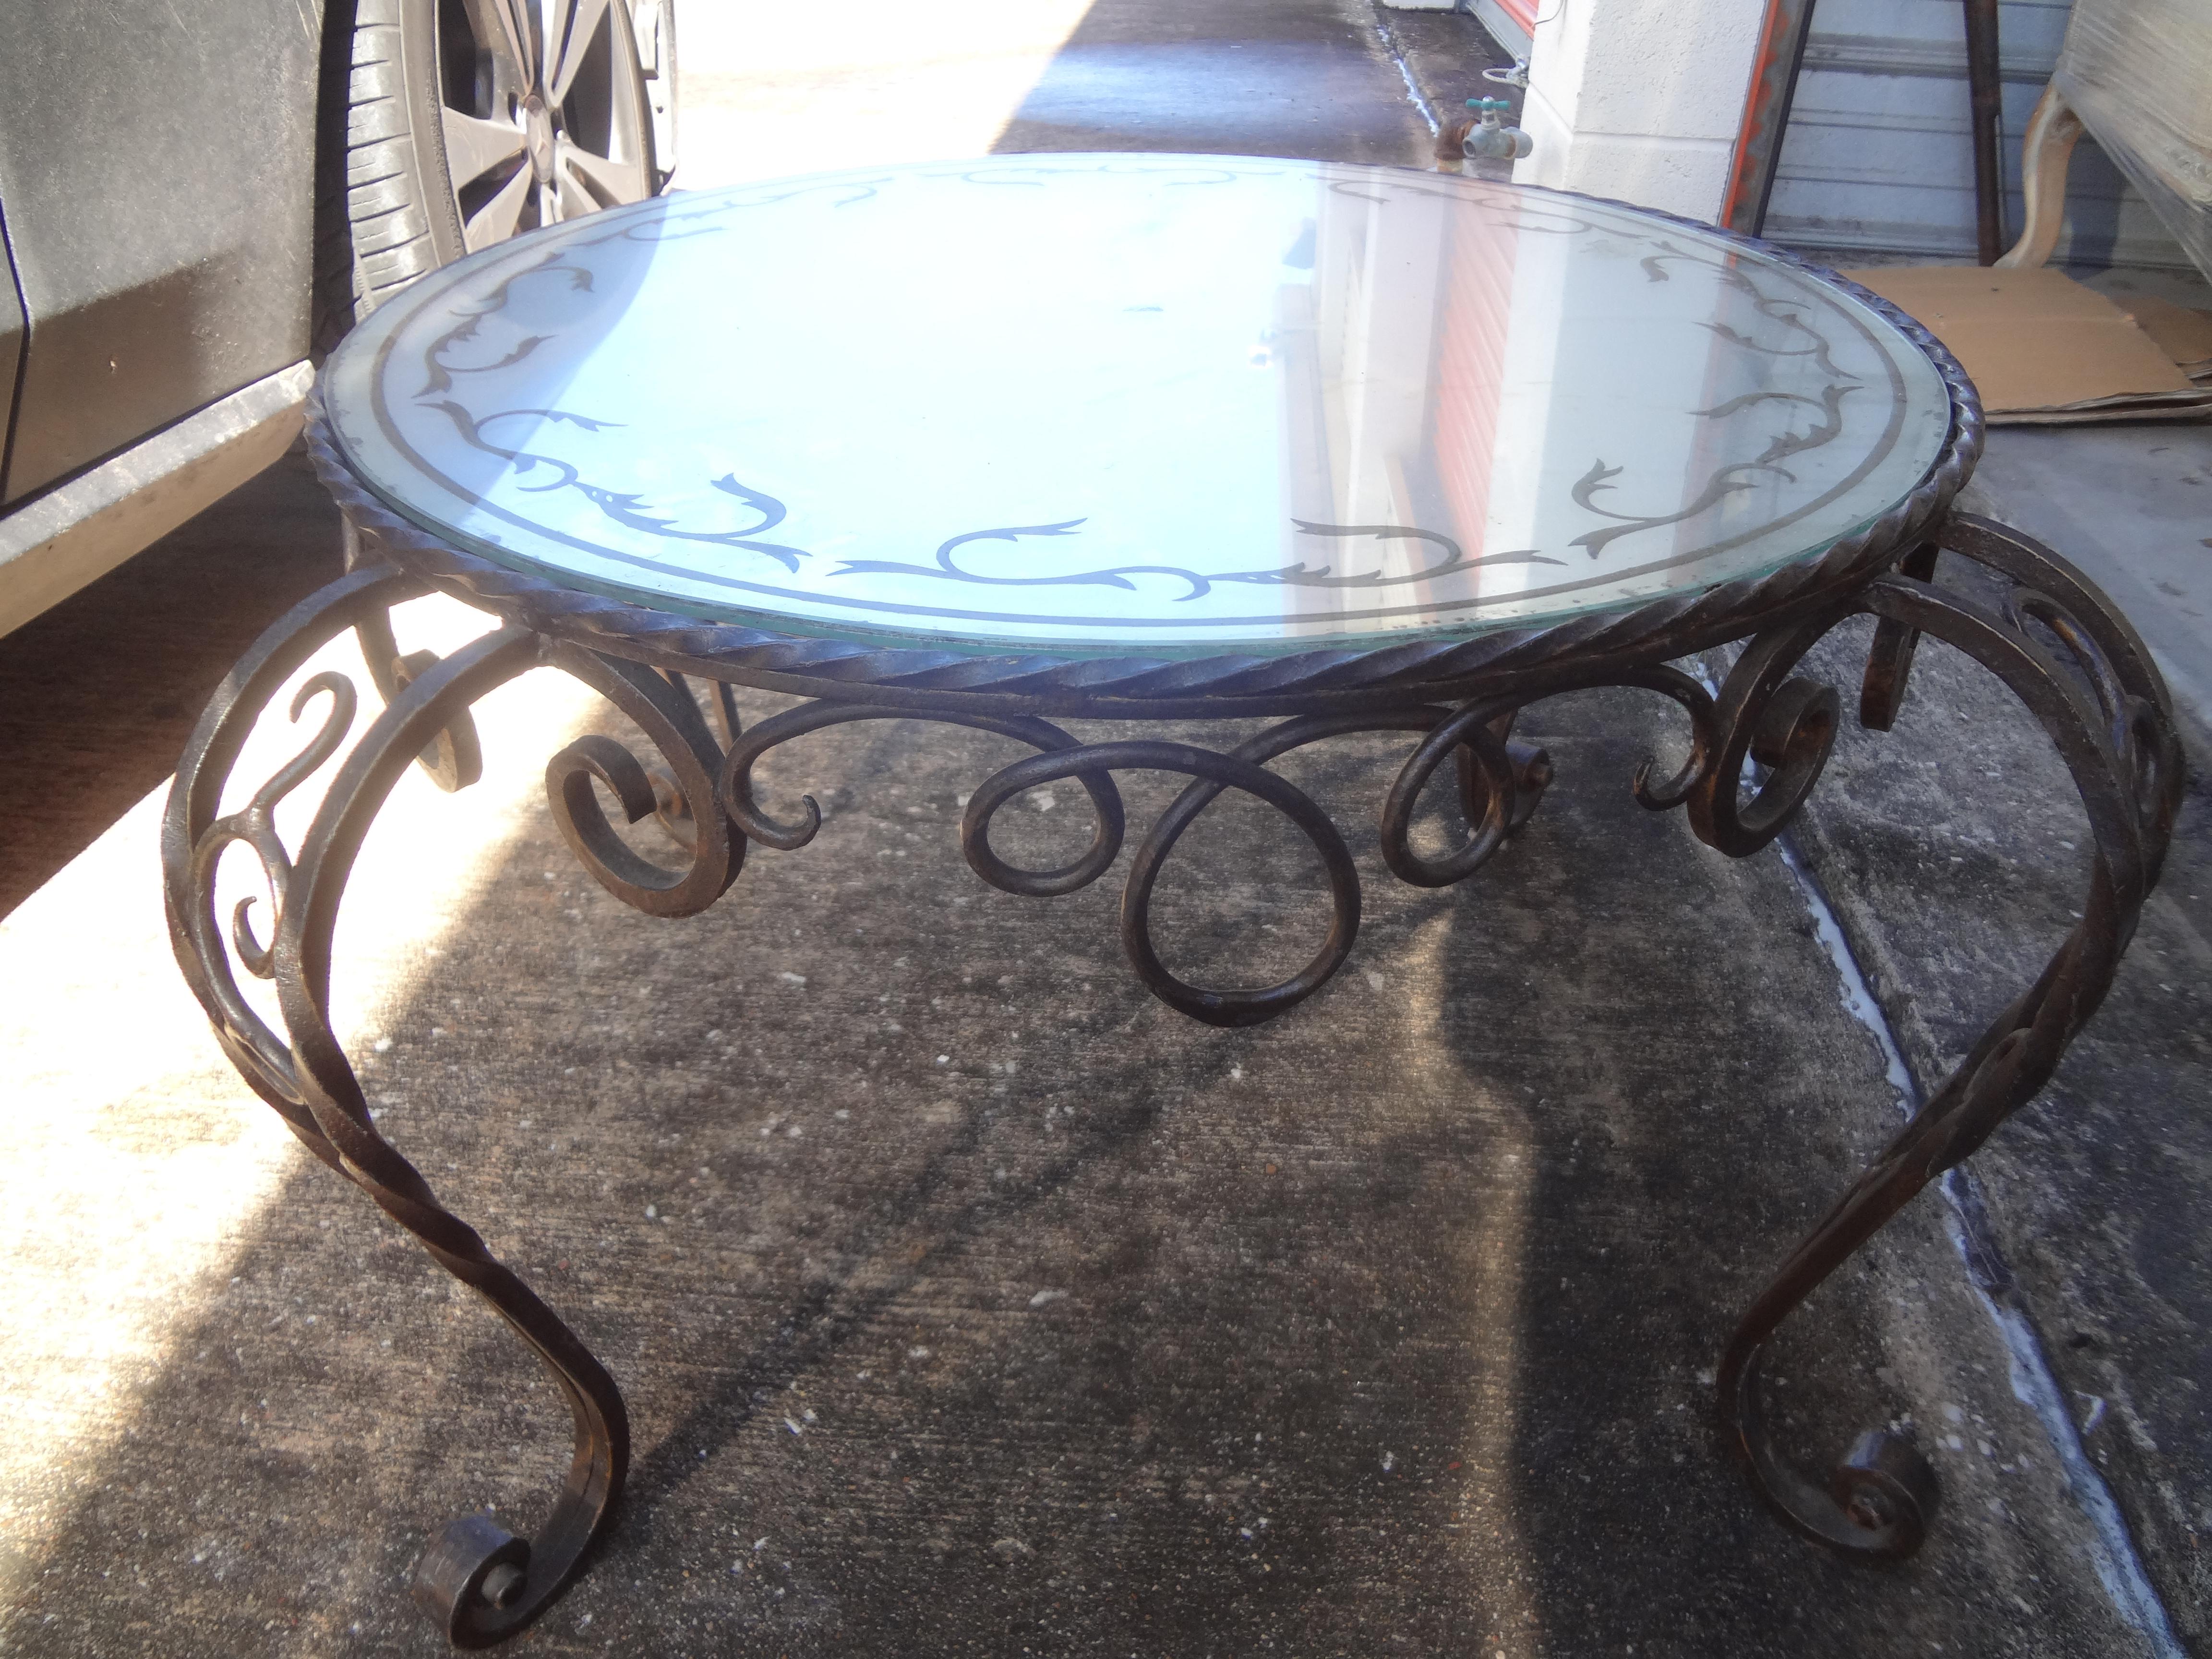 French wrought iron cocktail table with Églomisé Top.
Great French 1940s round hand forged wrought iron cocktail table or coffee table with gilt decorated eglomise top.
The églomisé (reverse decorated) mirrored top has light wear, but no chips or